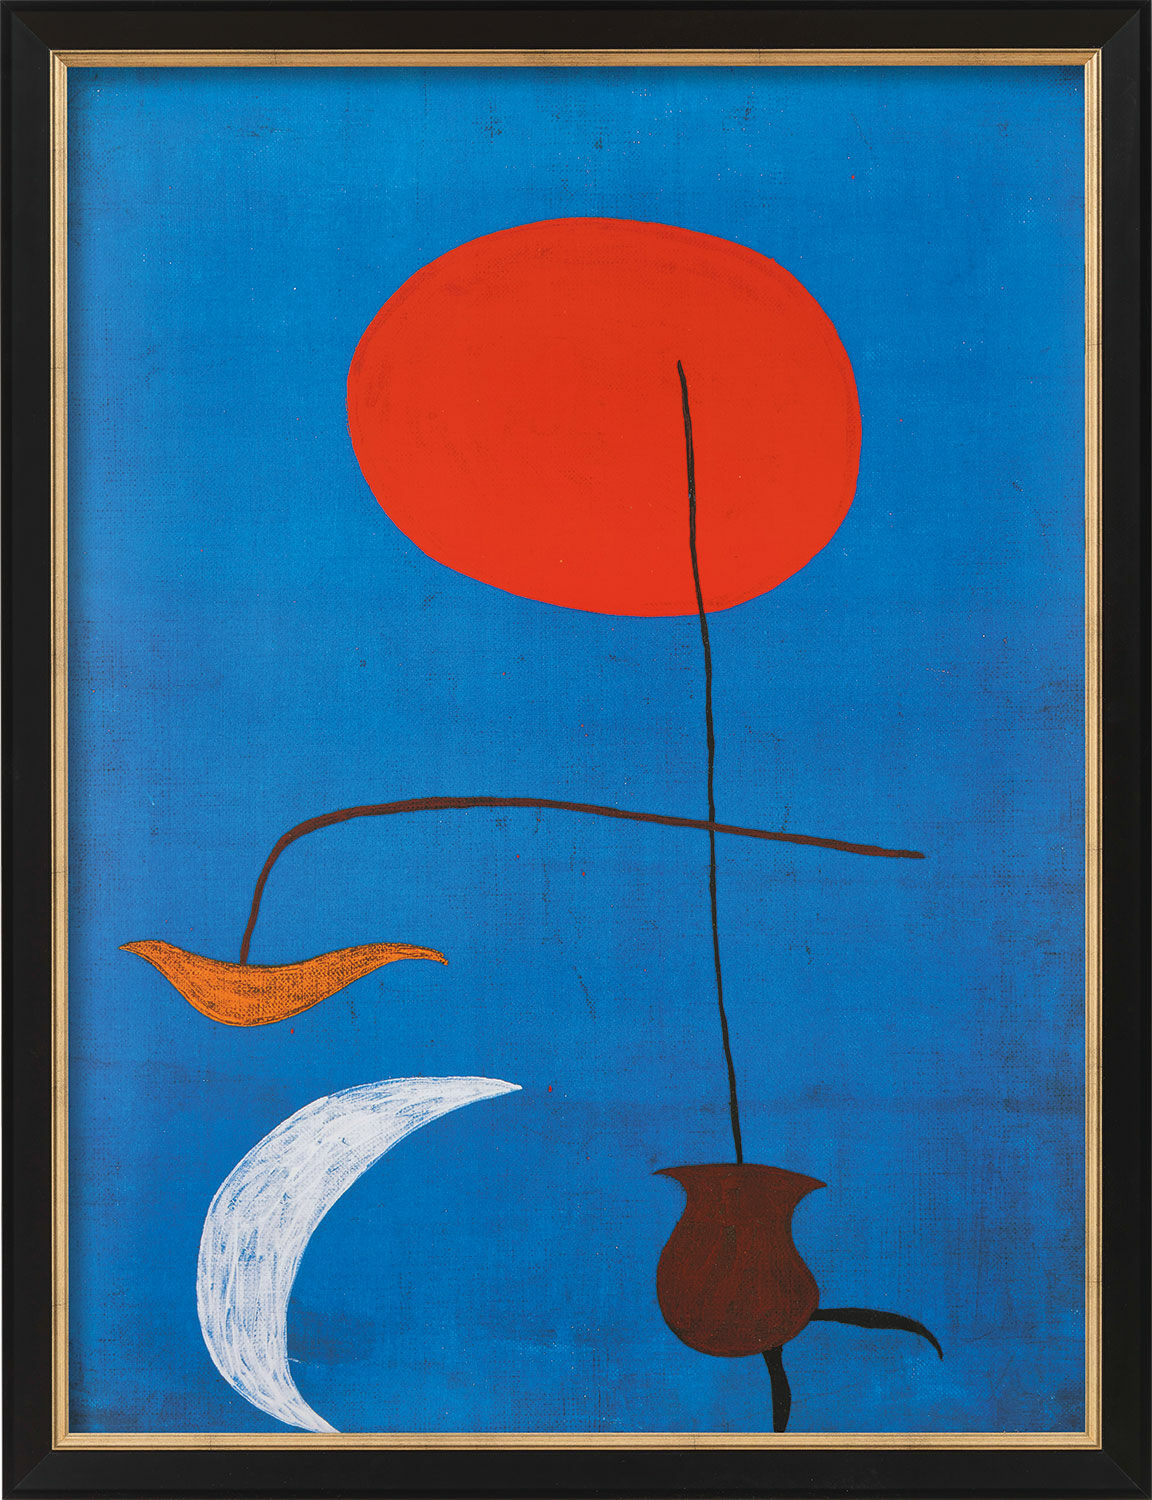 Picture "Design for a Tapestry" (1972), framed by Joan Miró